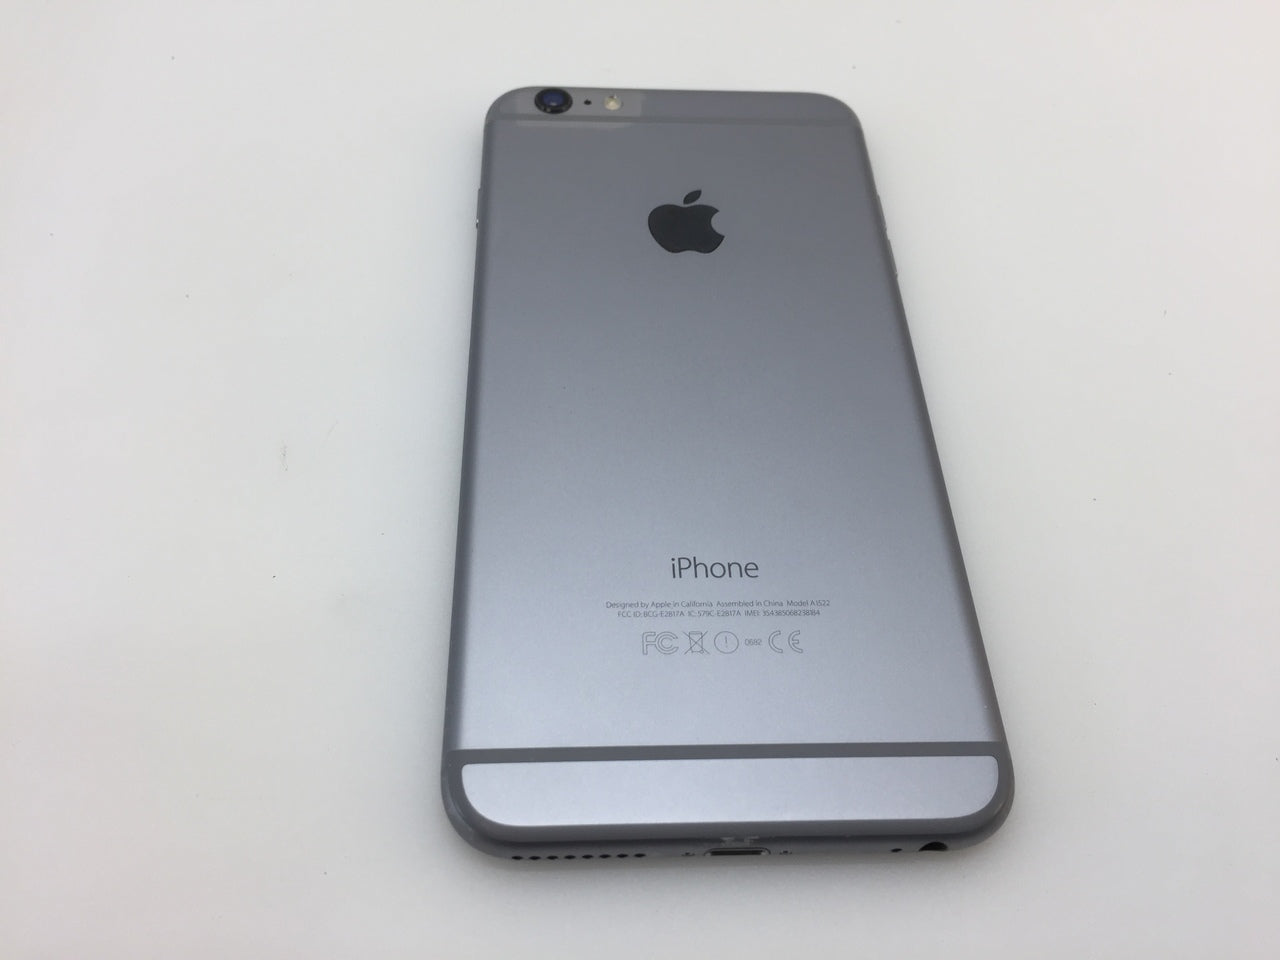 Apple iPhone 6 Plus - 64GB - Space Gray (AT&T) A1522 (GSM) – NT